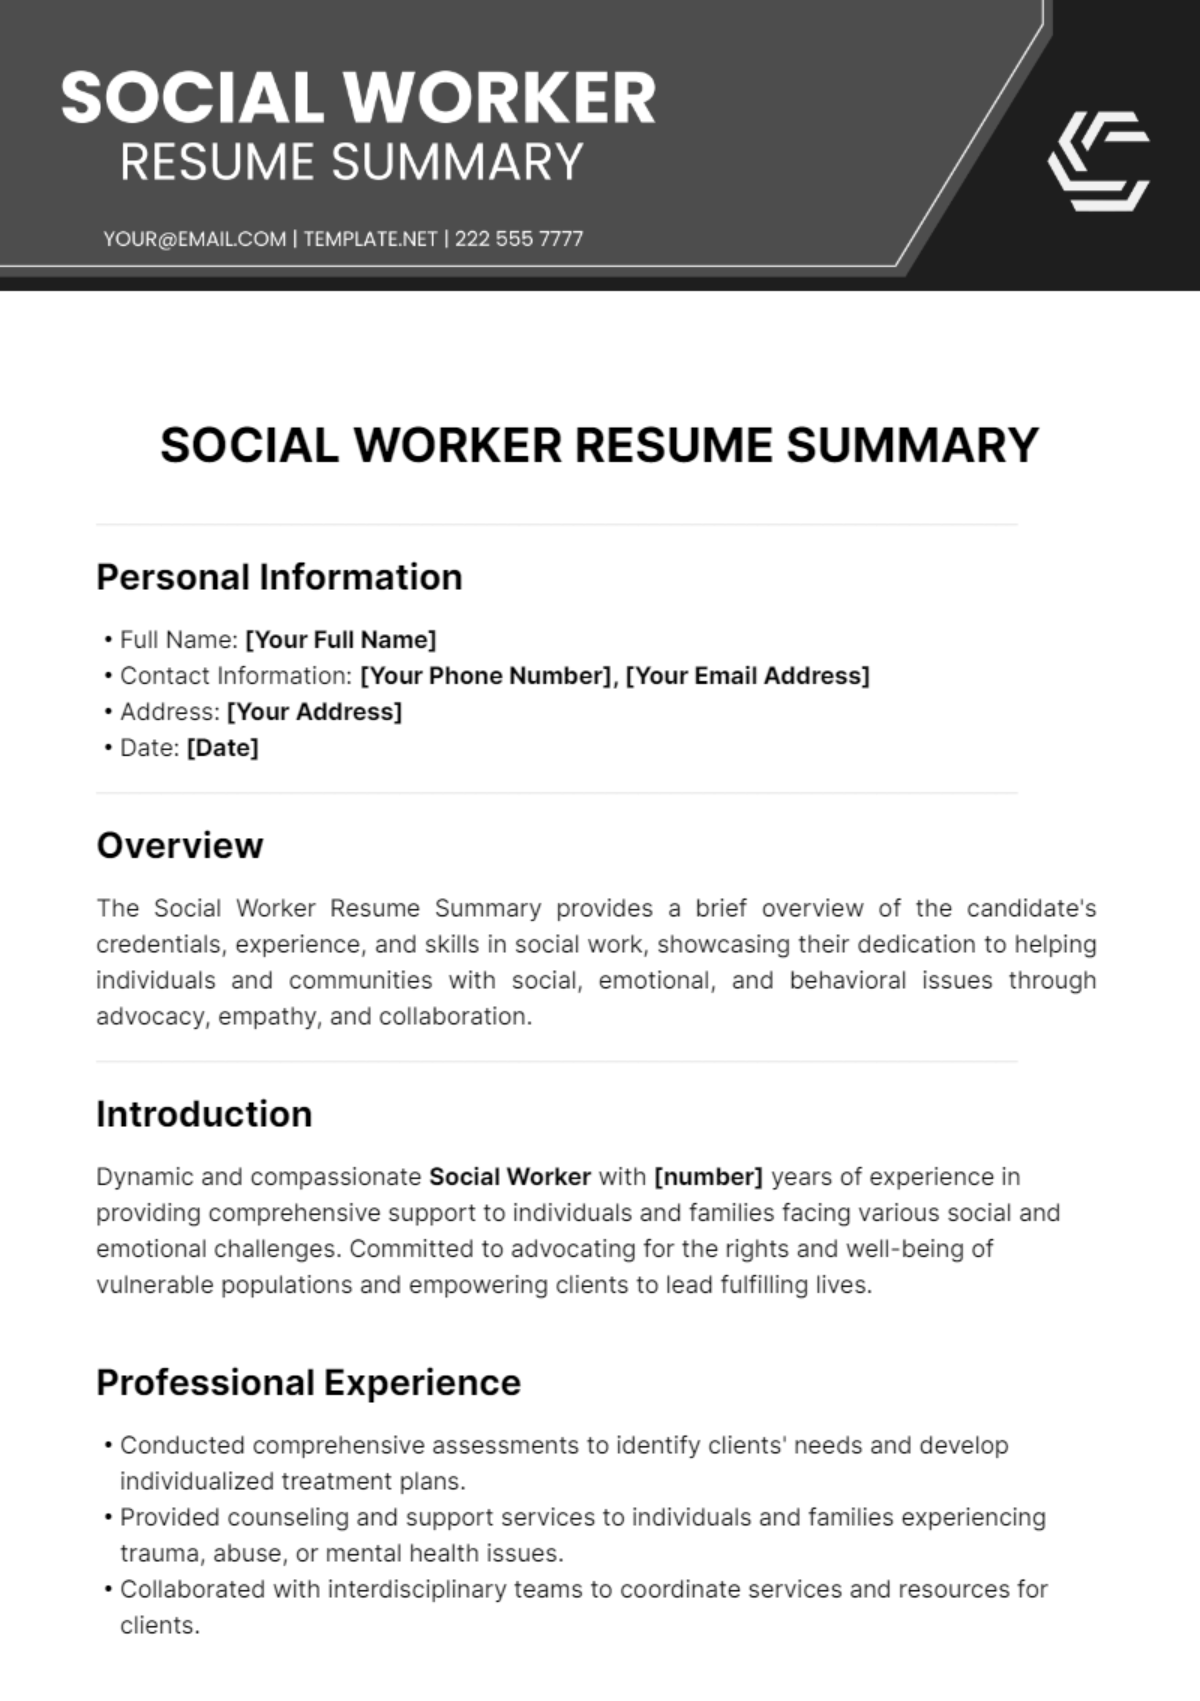 Social Worker Resume Summary Template